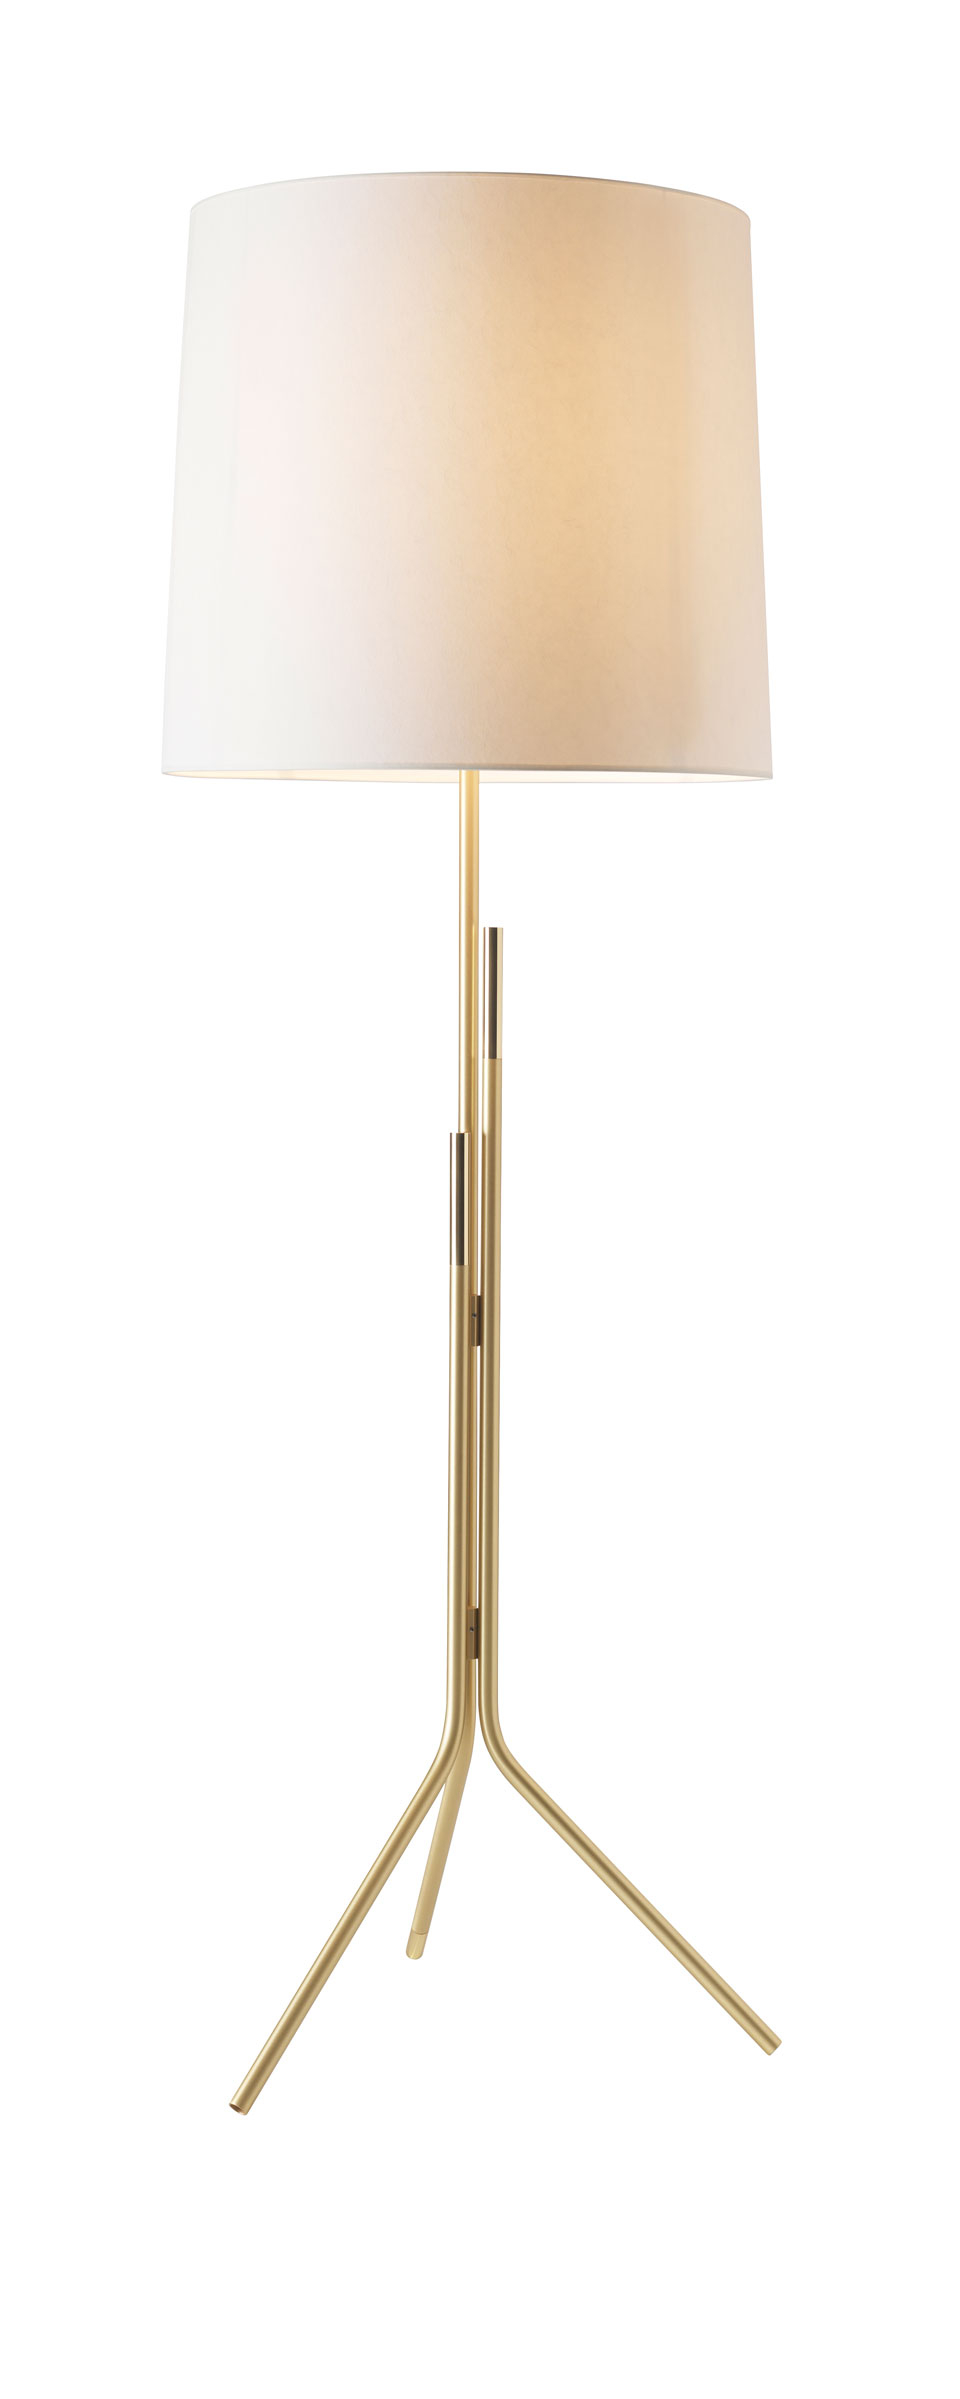 Contemporary Floor Lamp Brass Stand Cylindrical Shade In White Drop Paper Design Herv Langlais intended for proportions 960 X 2399